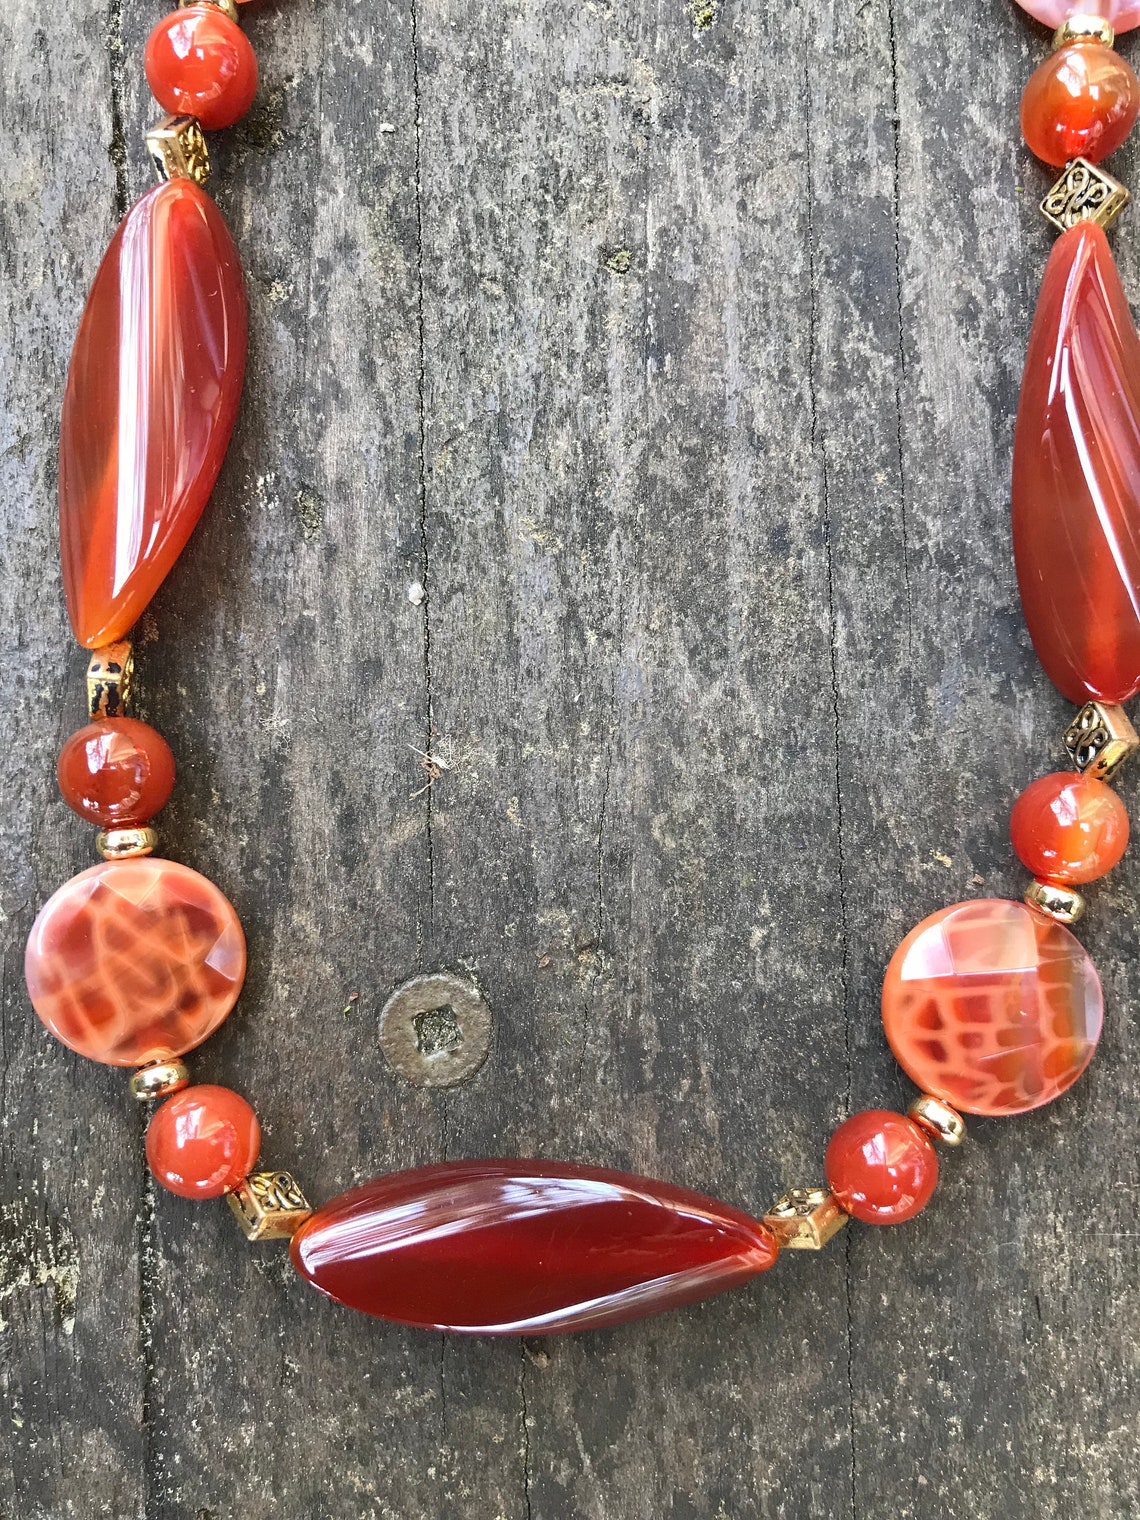 Carnelian and Fire Agate necklace fun shaped Carnelian beads. | Etsy